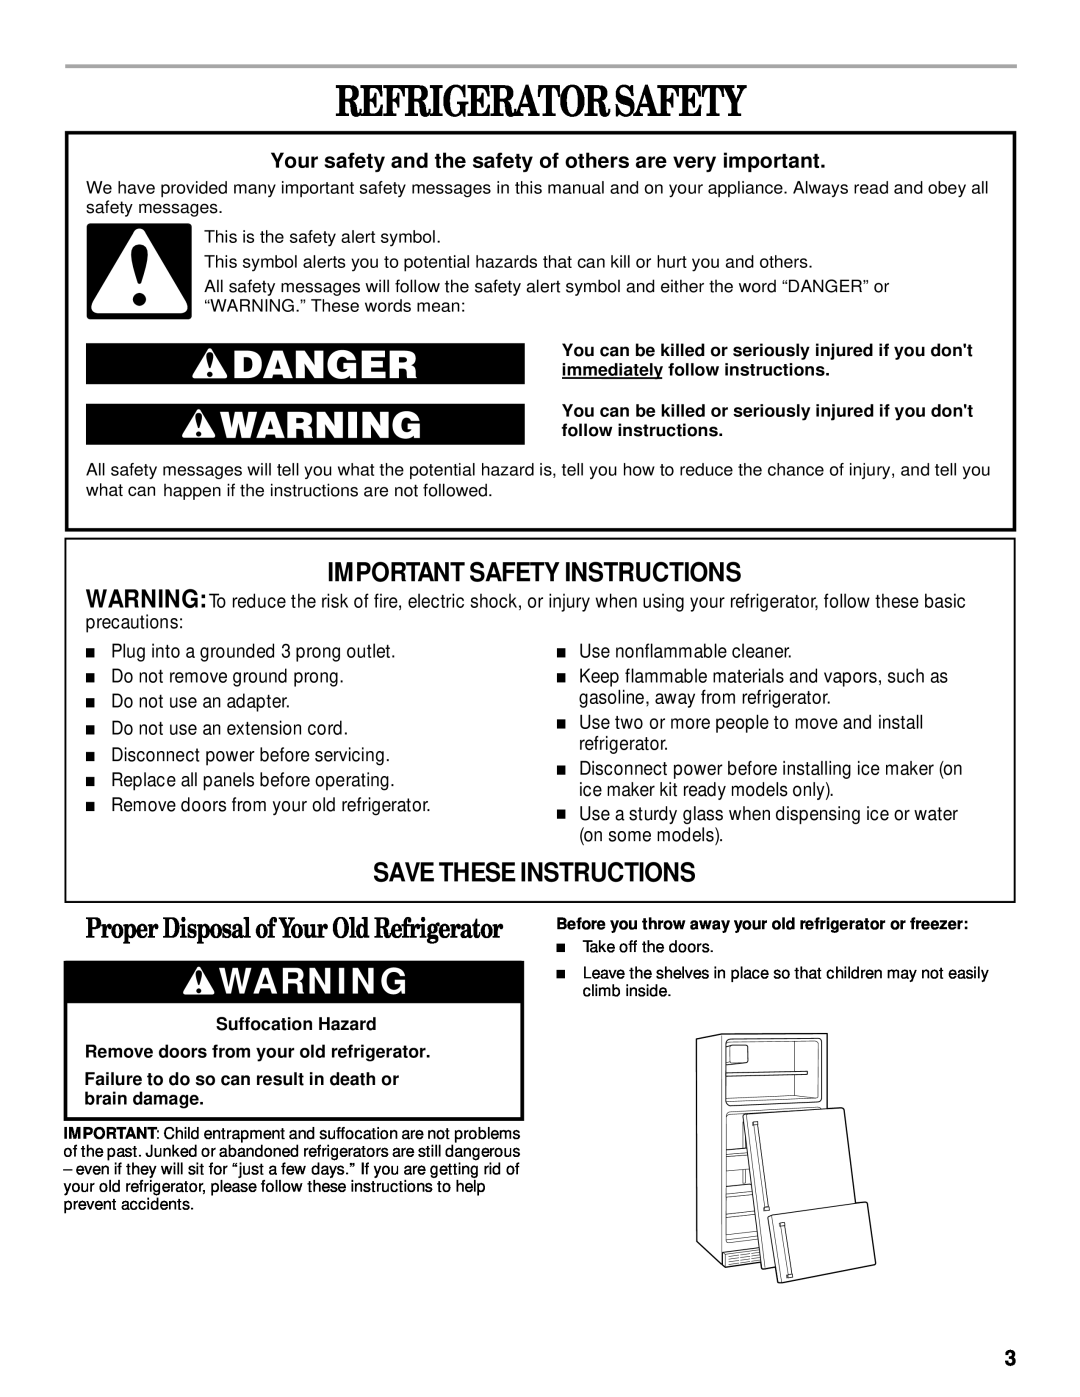 Whirlpool 2205266 manual Refrigeratorsafety, Proper Disposal of Your Old Refrigerator, Important Safety Instructions 